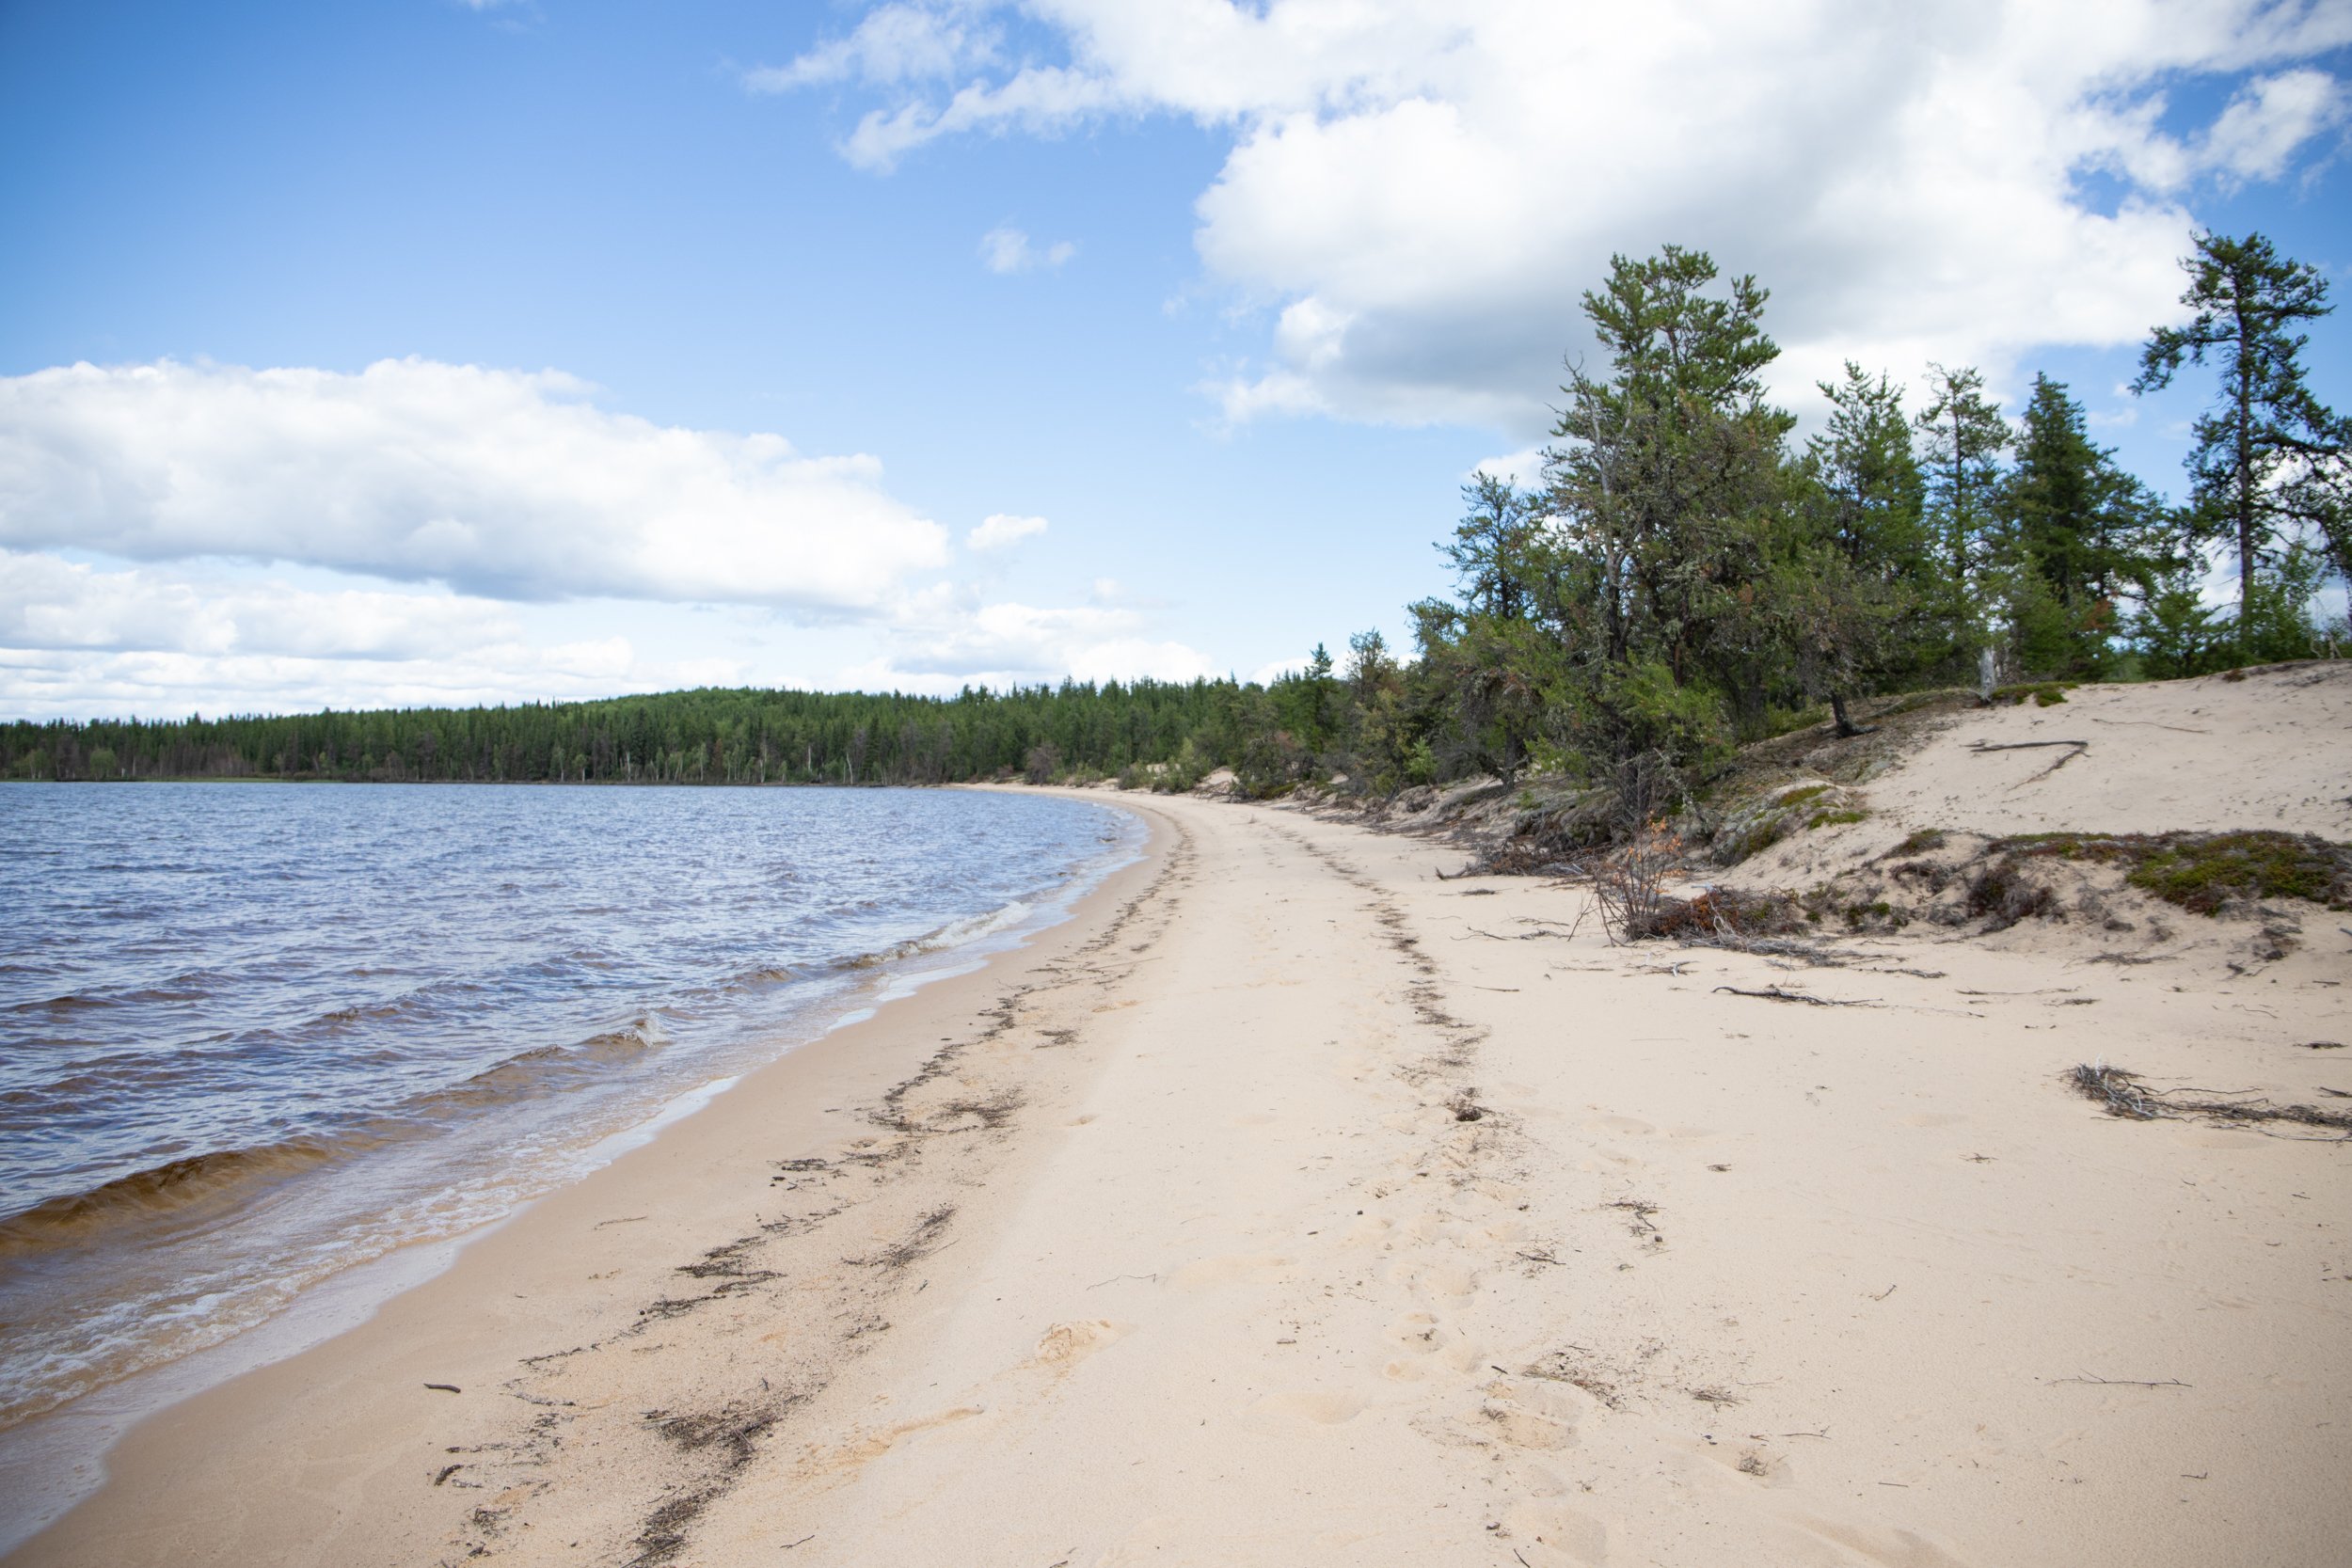  One of the many secluded sandy beaches on Careen Lake in Northern Saskatchewan  